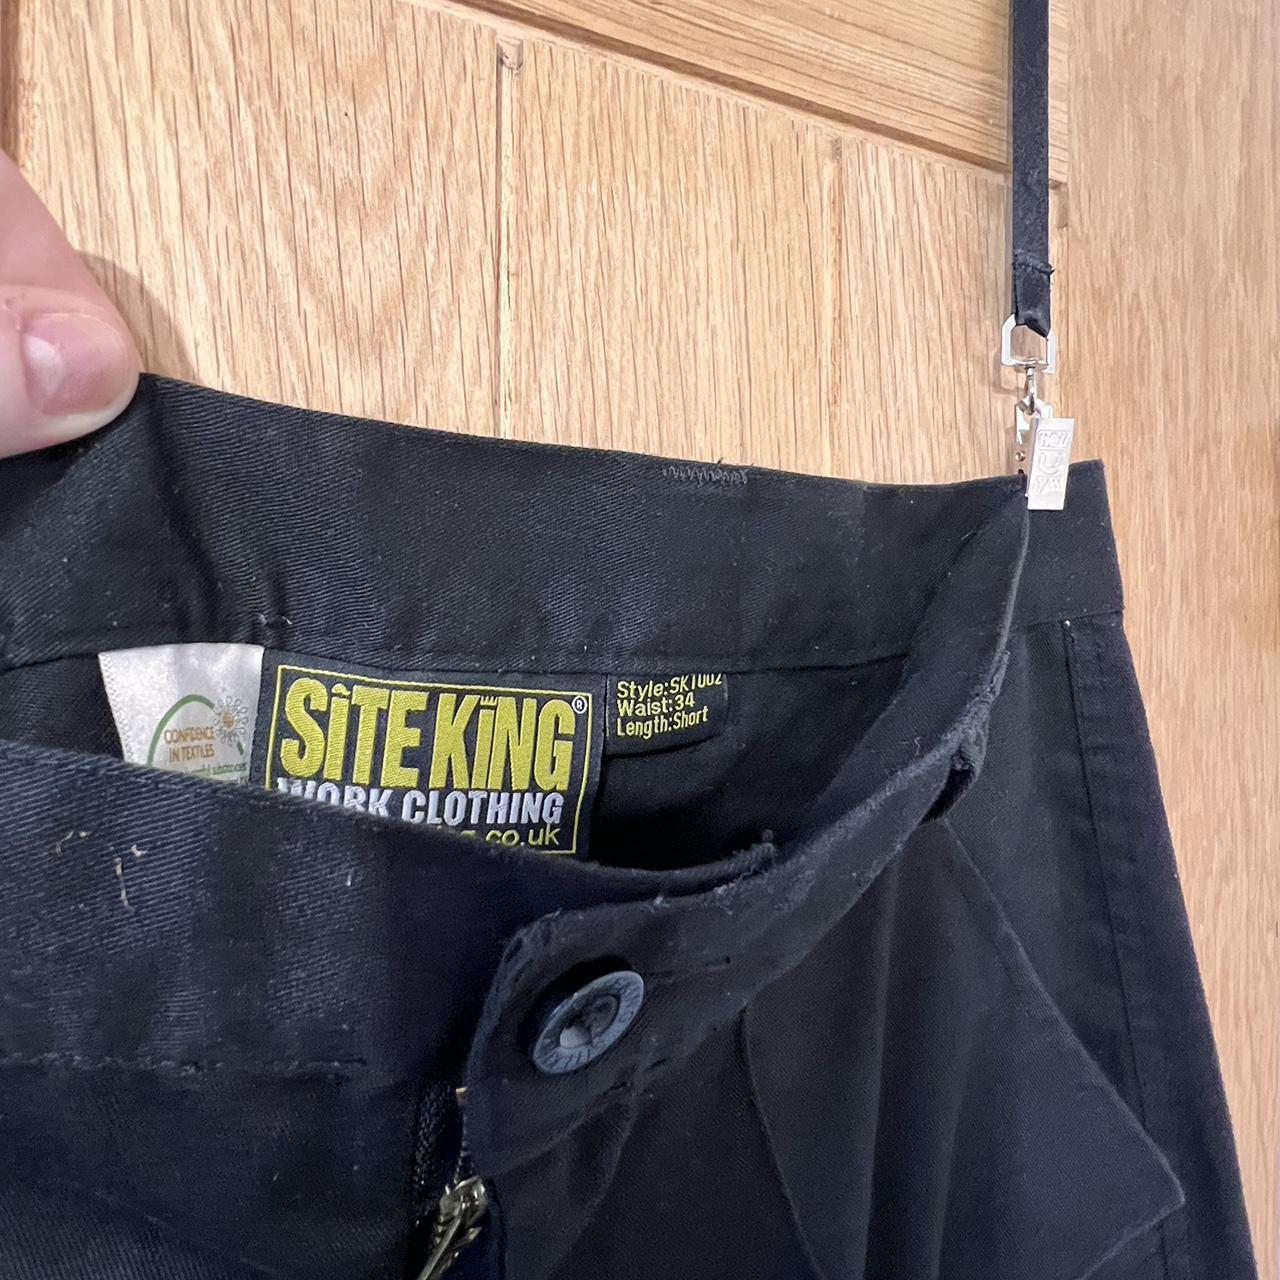 MENS CONTRAST MULTI Pocket Cargo Combat Work Trousers By SITE KING Size 30  to 44 £24.99 - PicClick UK